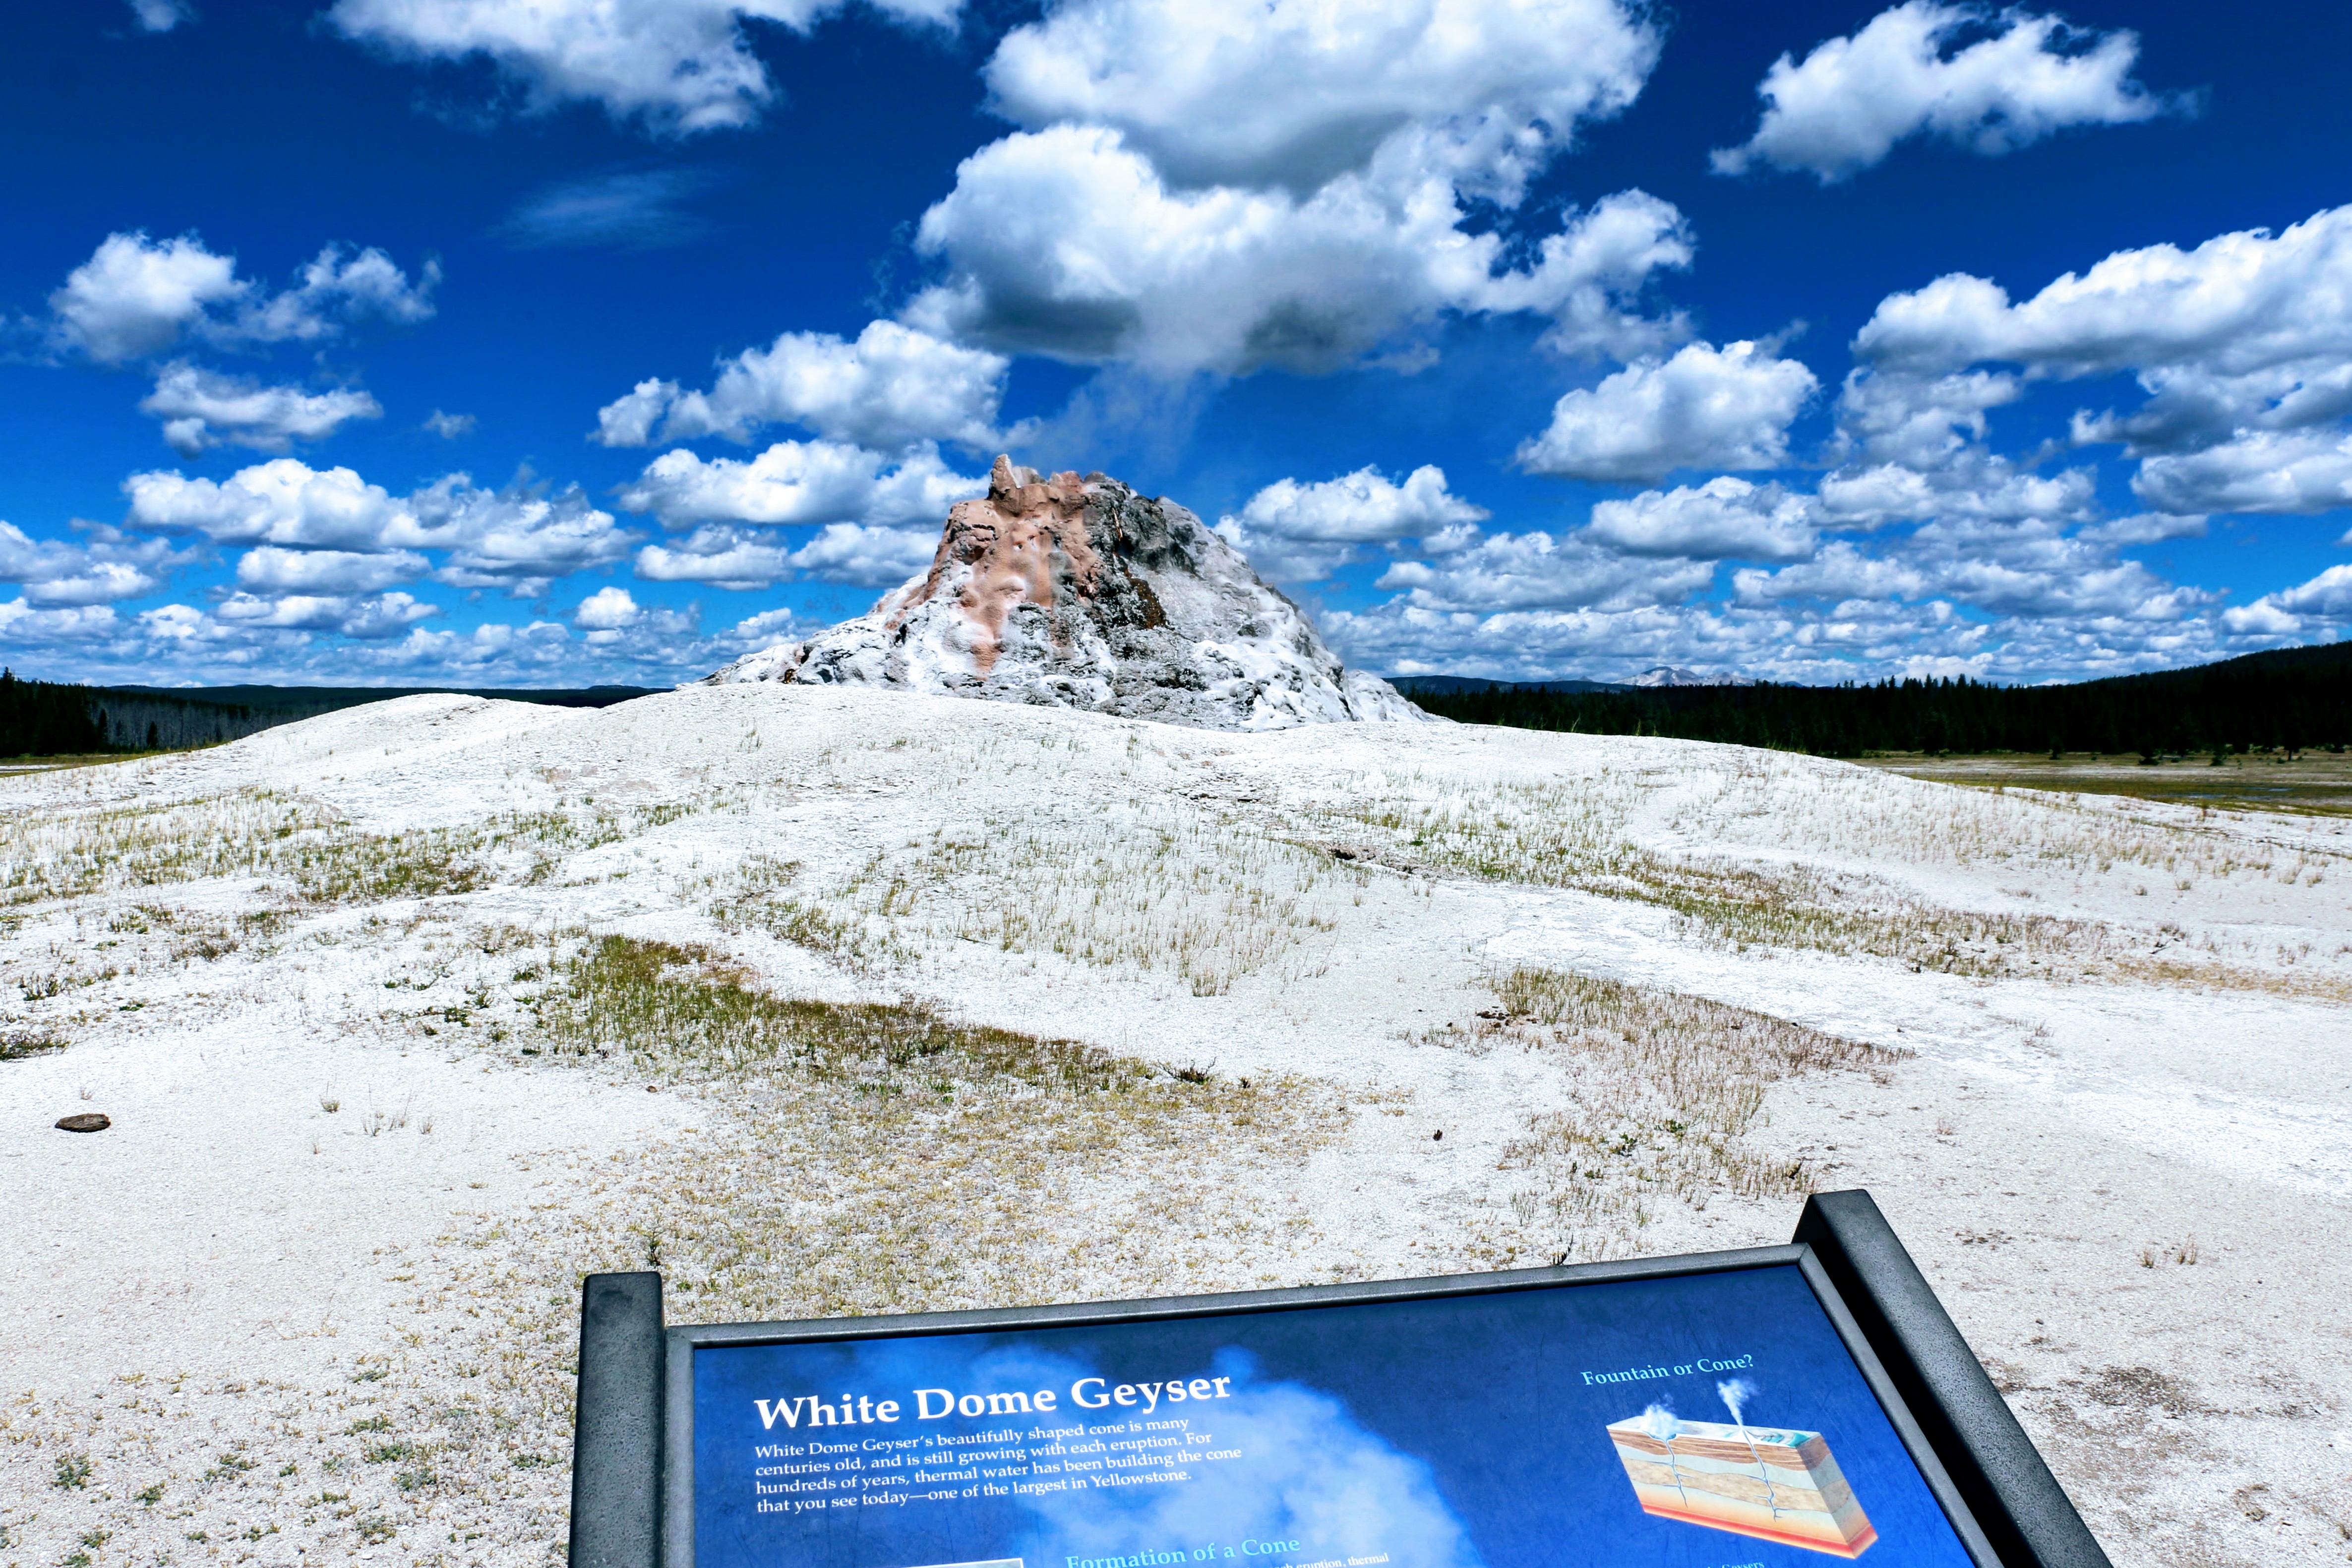 White Dome Geyser Yellowstone National Park